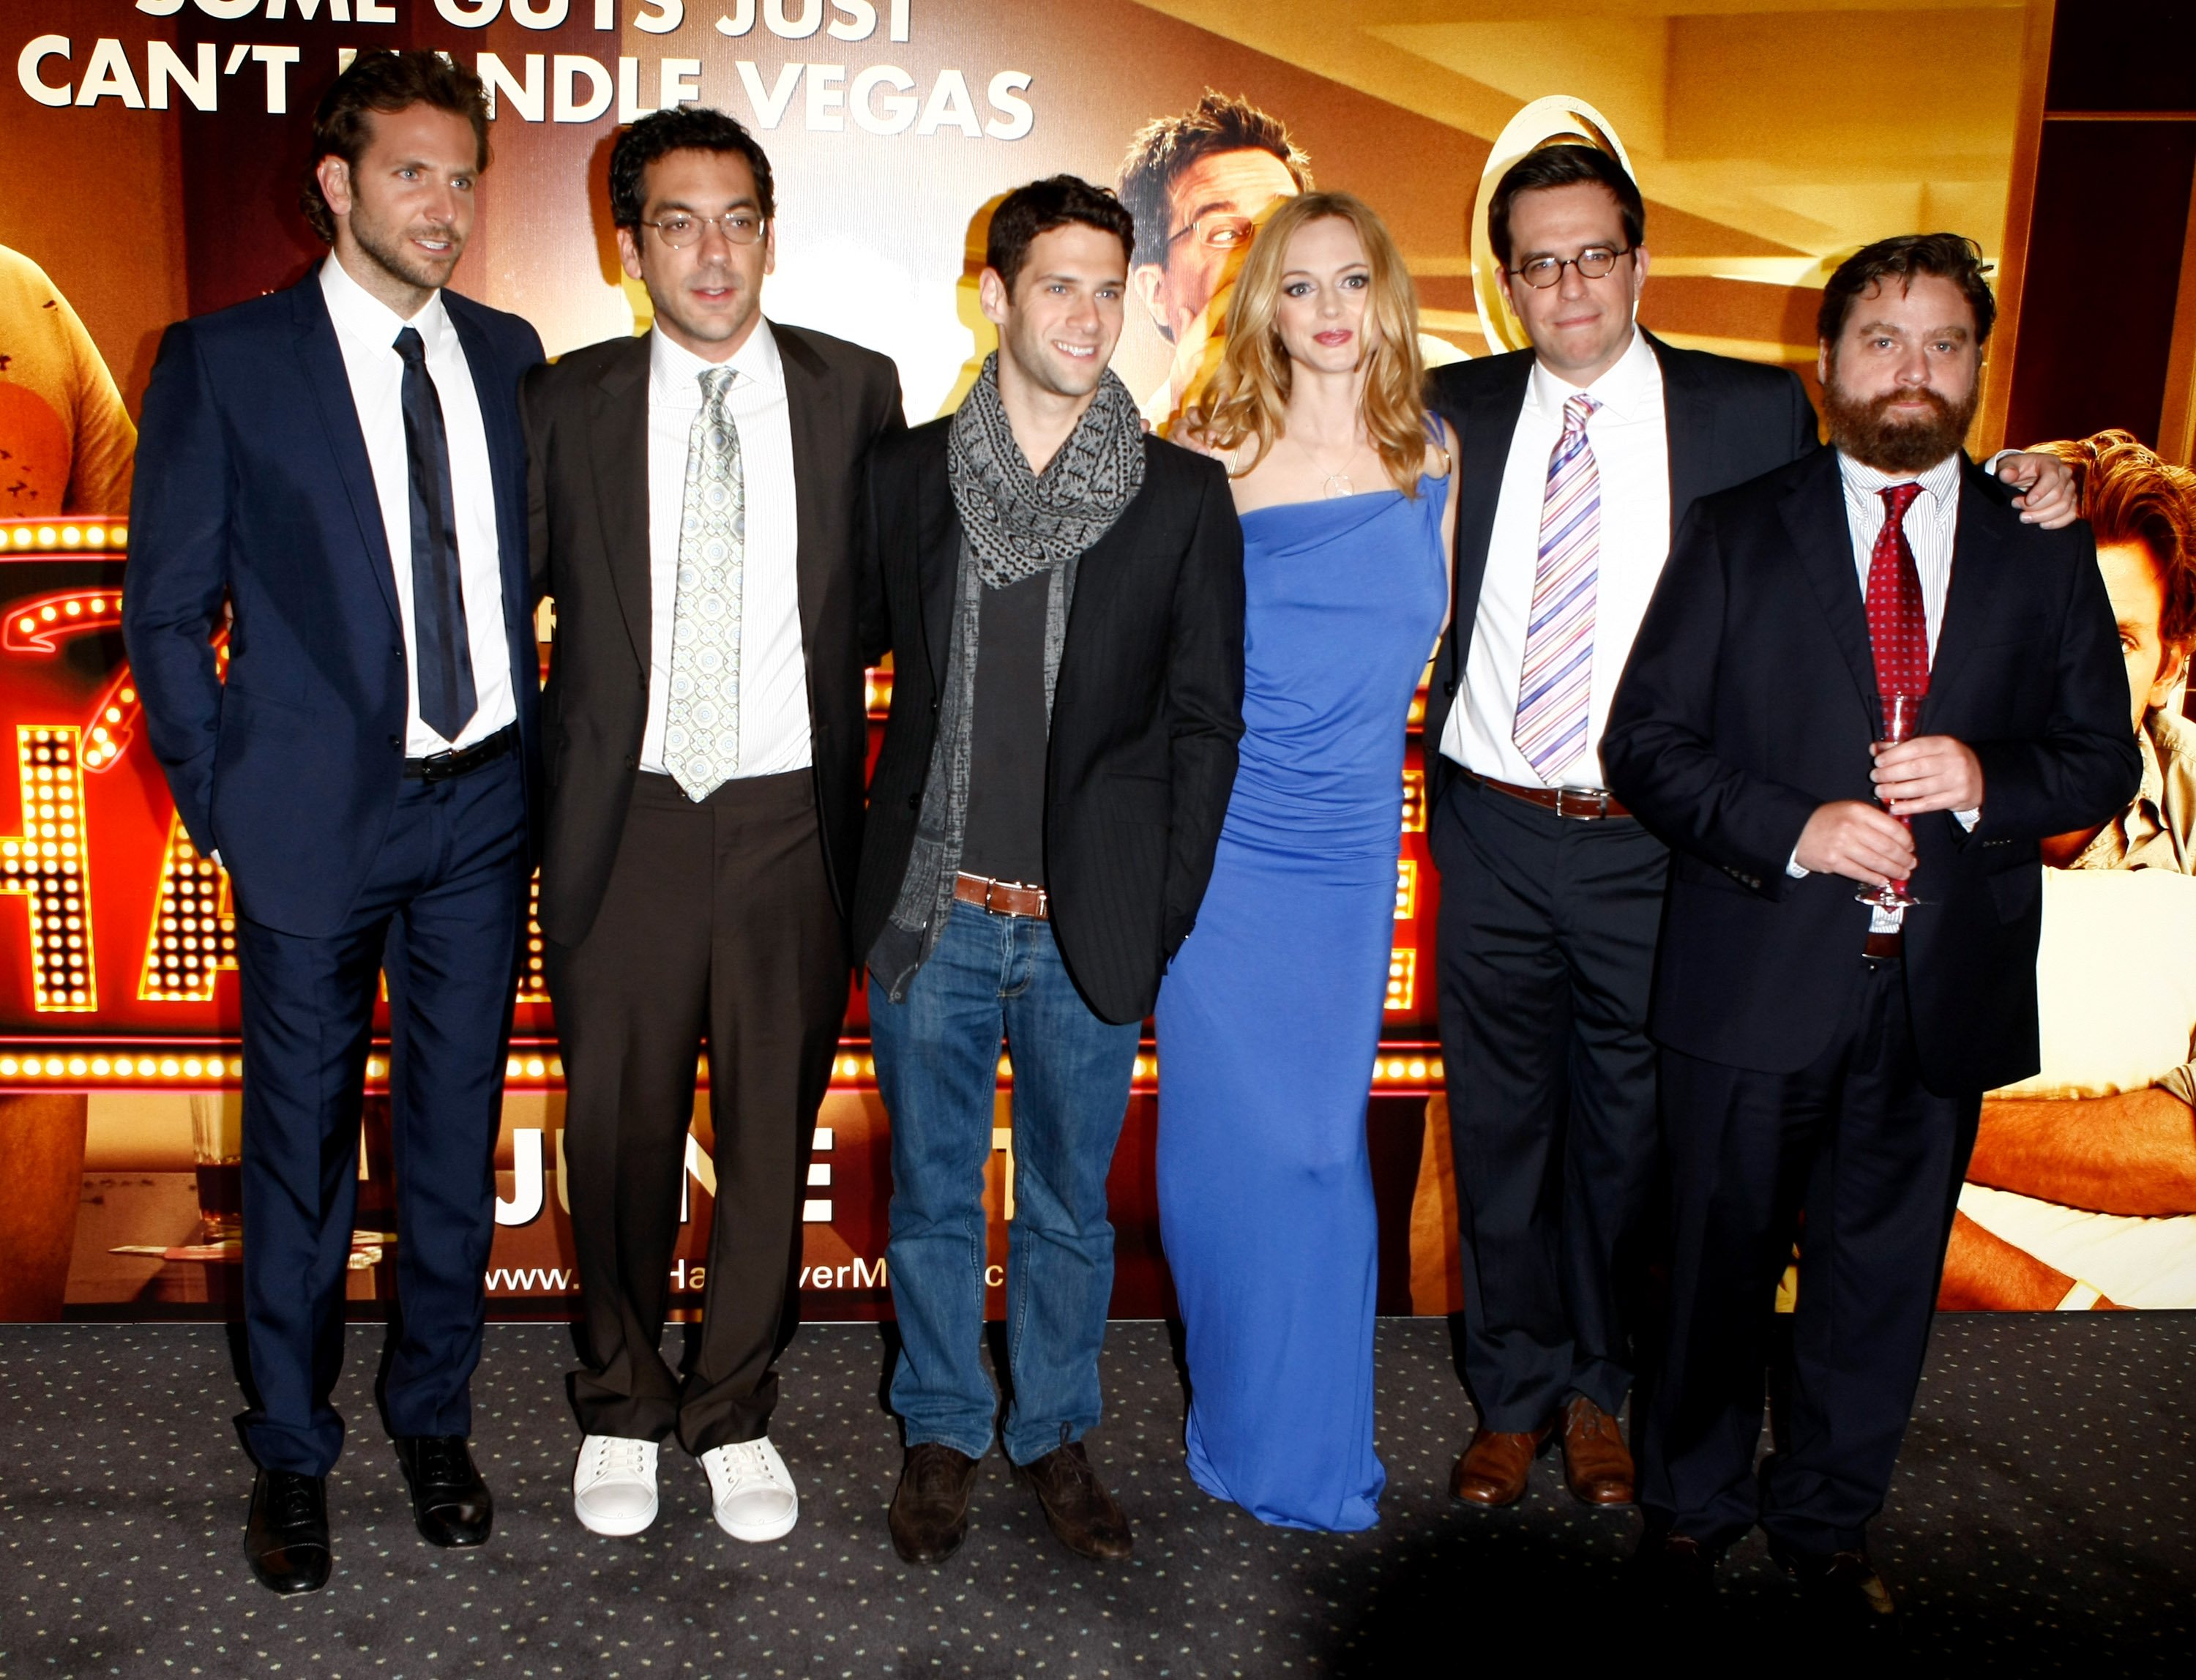 Bradley Cooper, Todd Phillips, Justin Bartha, Heather Graham, Ed Helms, and Zach Galifianakis at the premiere of the first edition in "The Hangover" trilogy in London, England, June 10, 2009. | Source: Getty Images